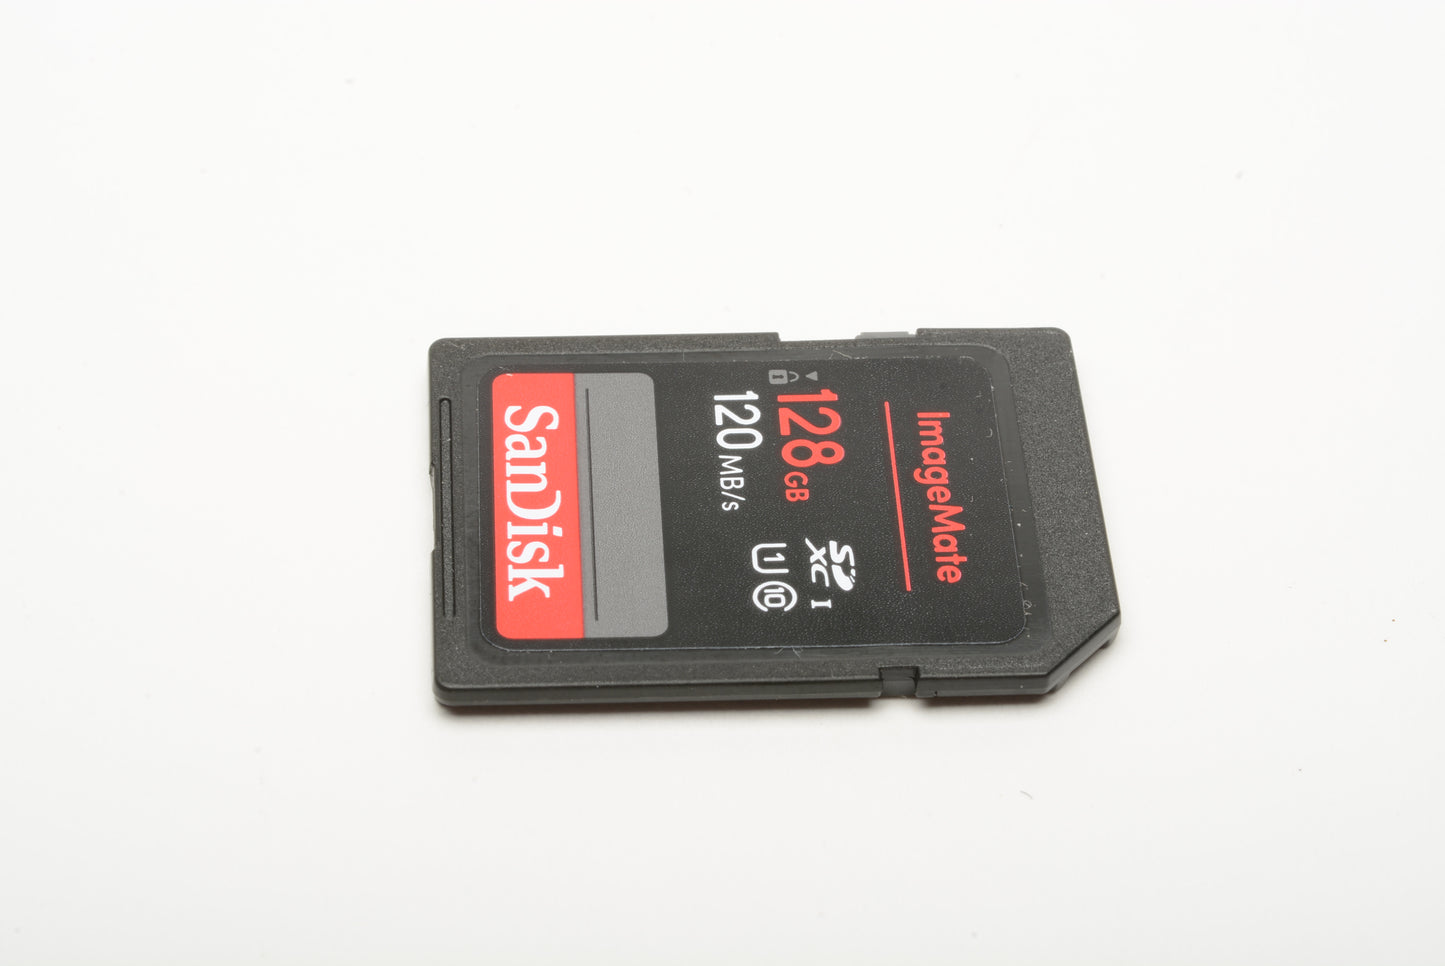 Sandisk Imagemate 128GB 120mb/s SD card in jewel case, formatted